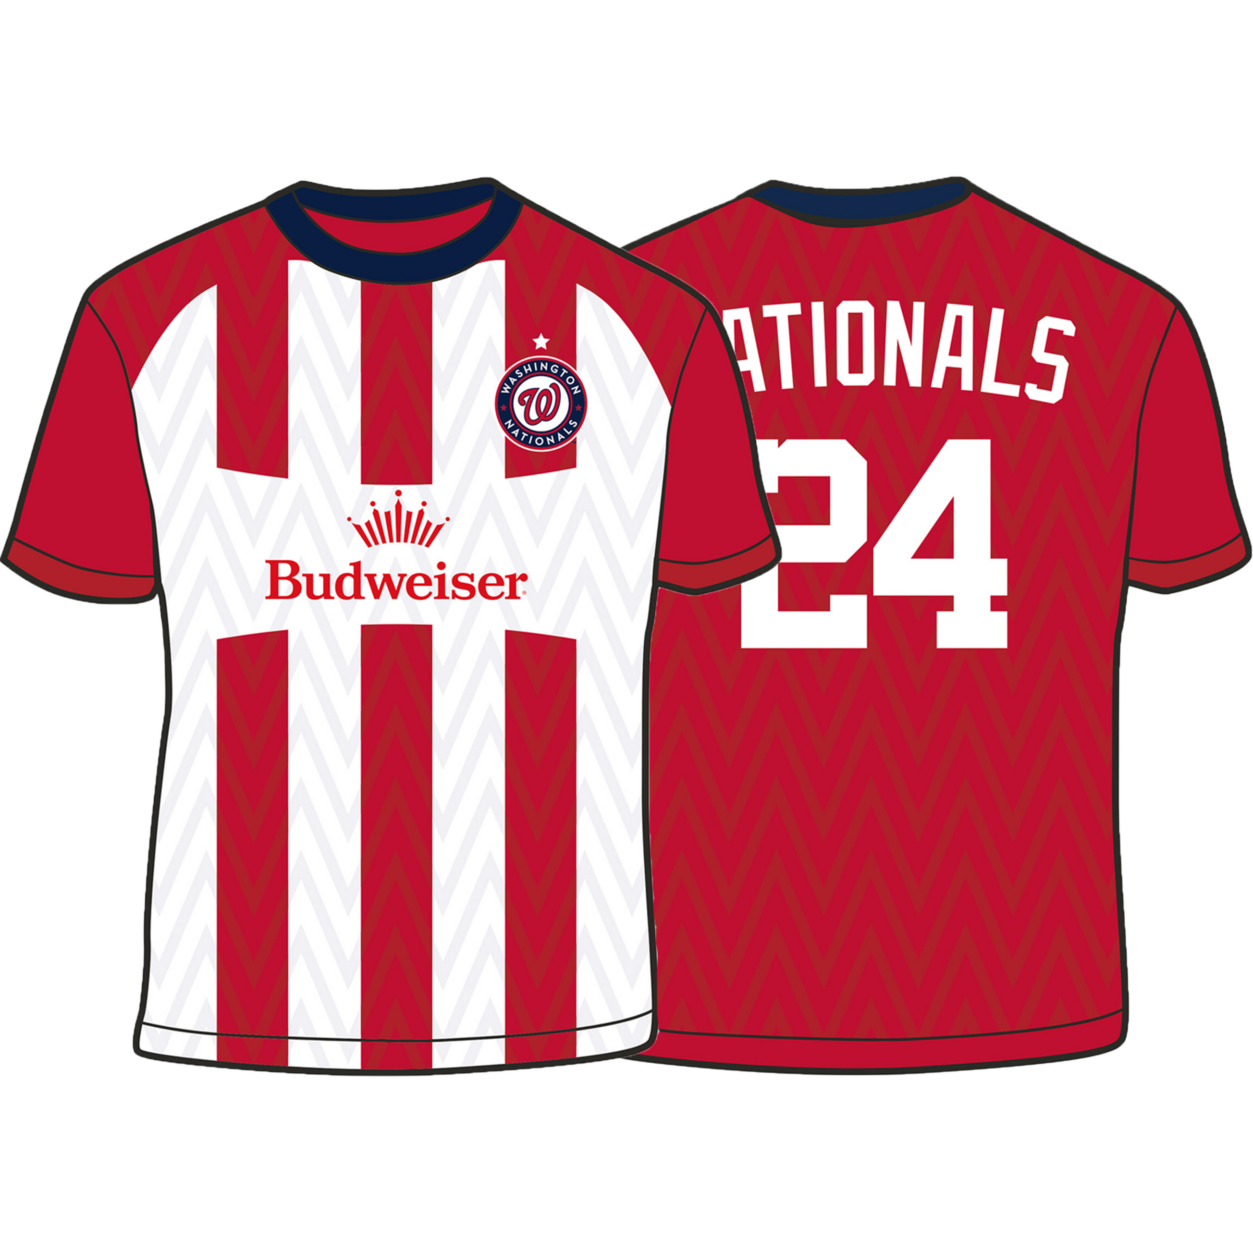 Nationals Soccer Jersey presented by Budweiser